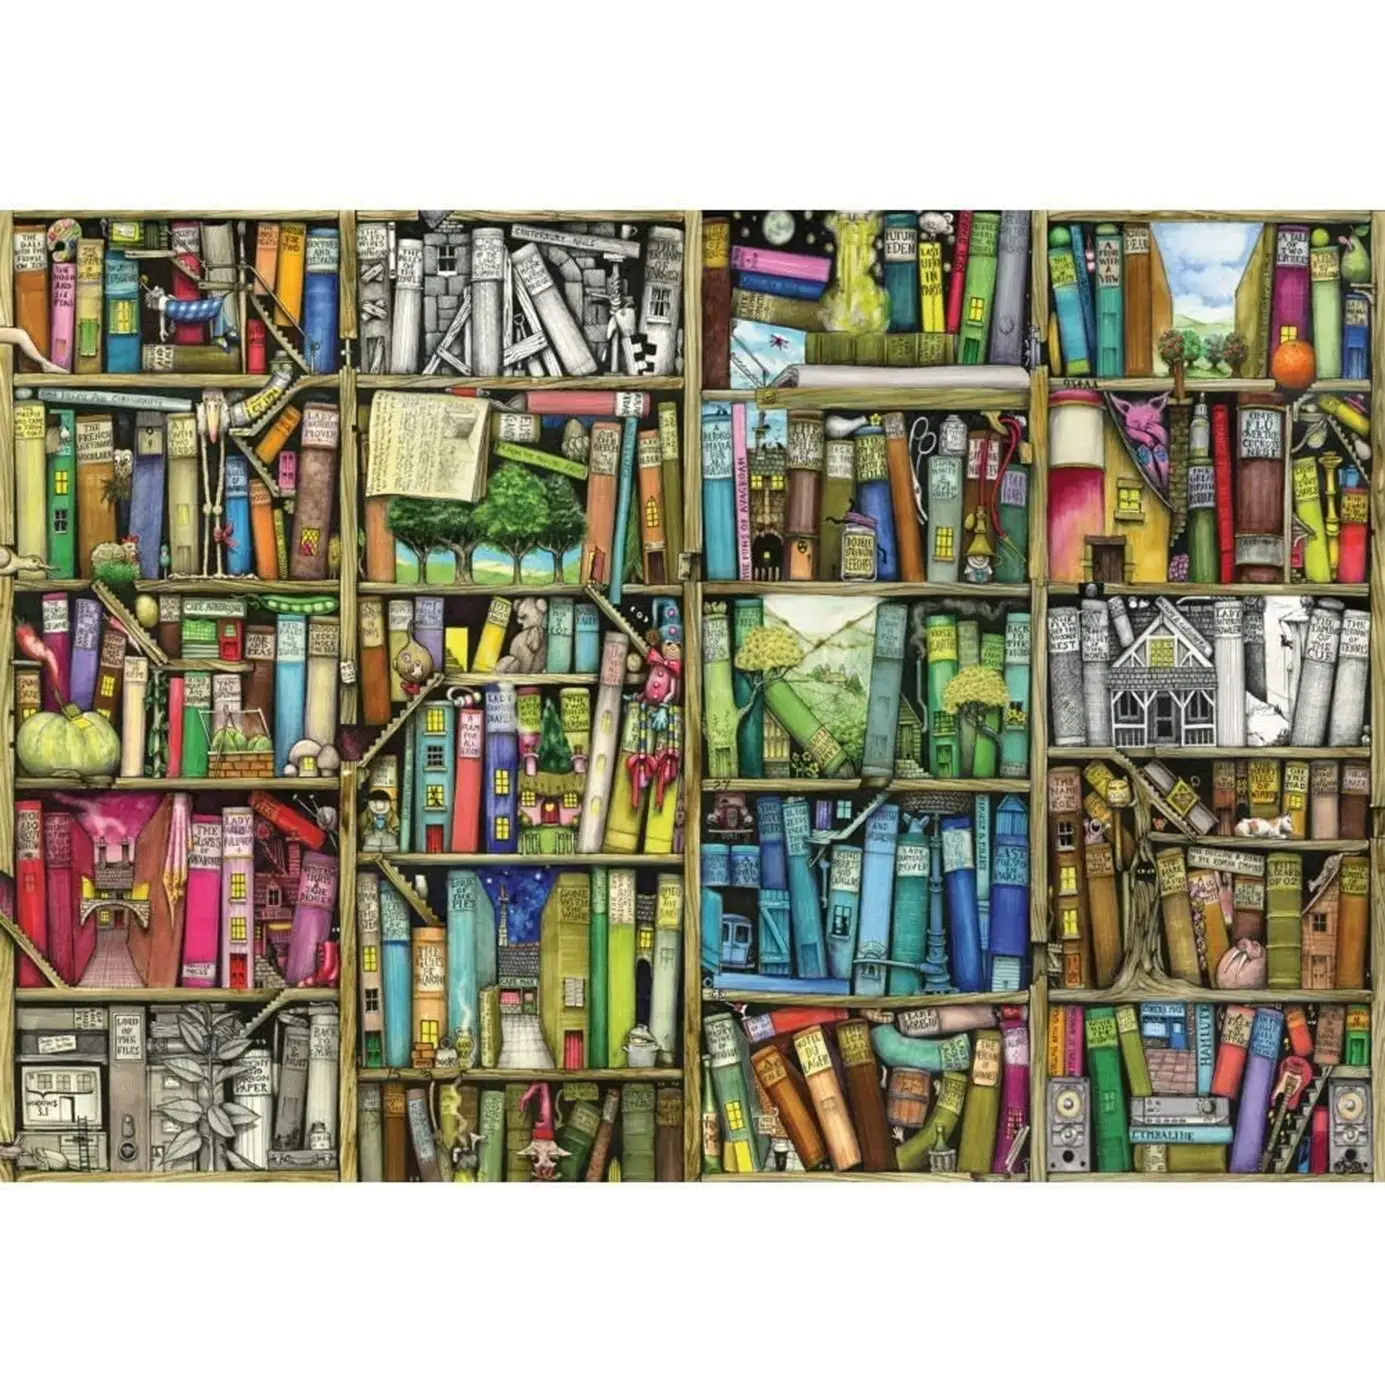 Wentworth Bookshelf 250 Piece Wooden Puzzle with Wood Shaped